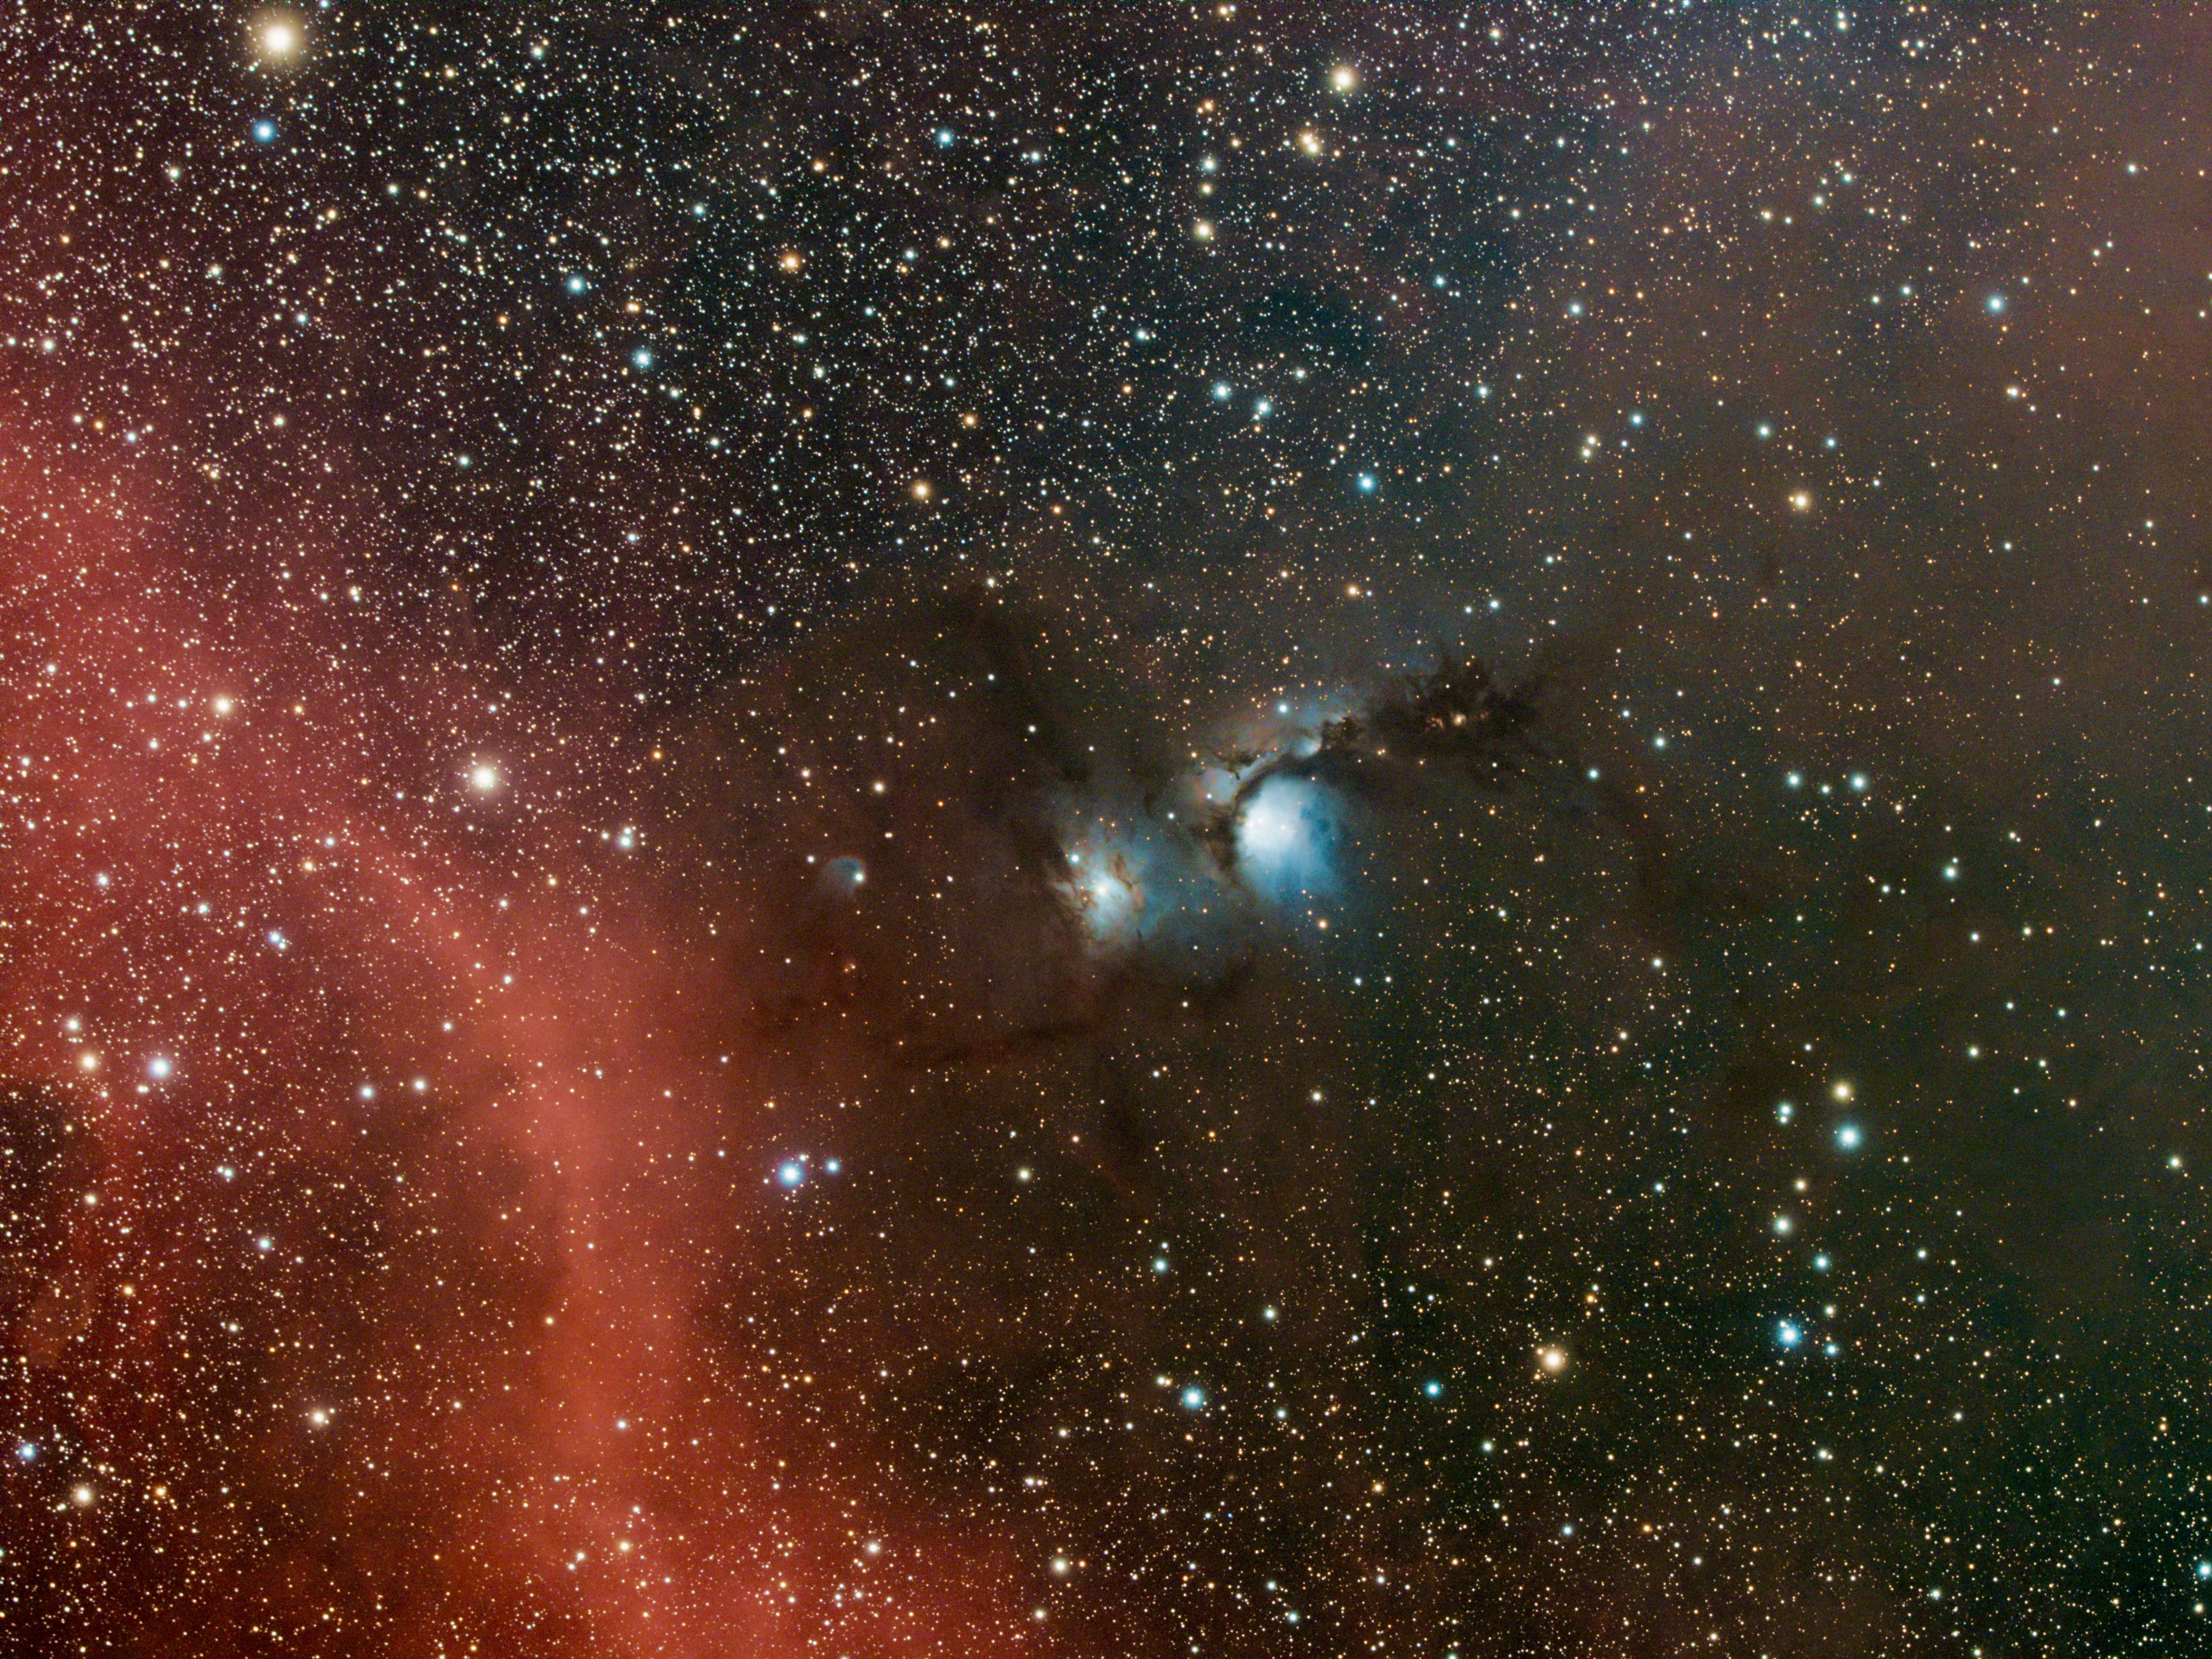 Messier 78 glows blue, surrounding by the starry backdrop of space. (Photo: © David Loose)